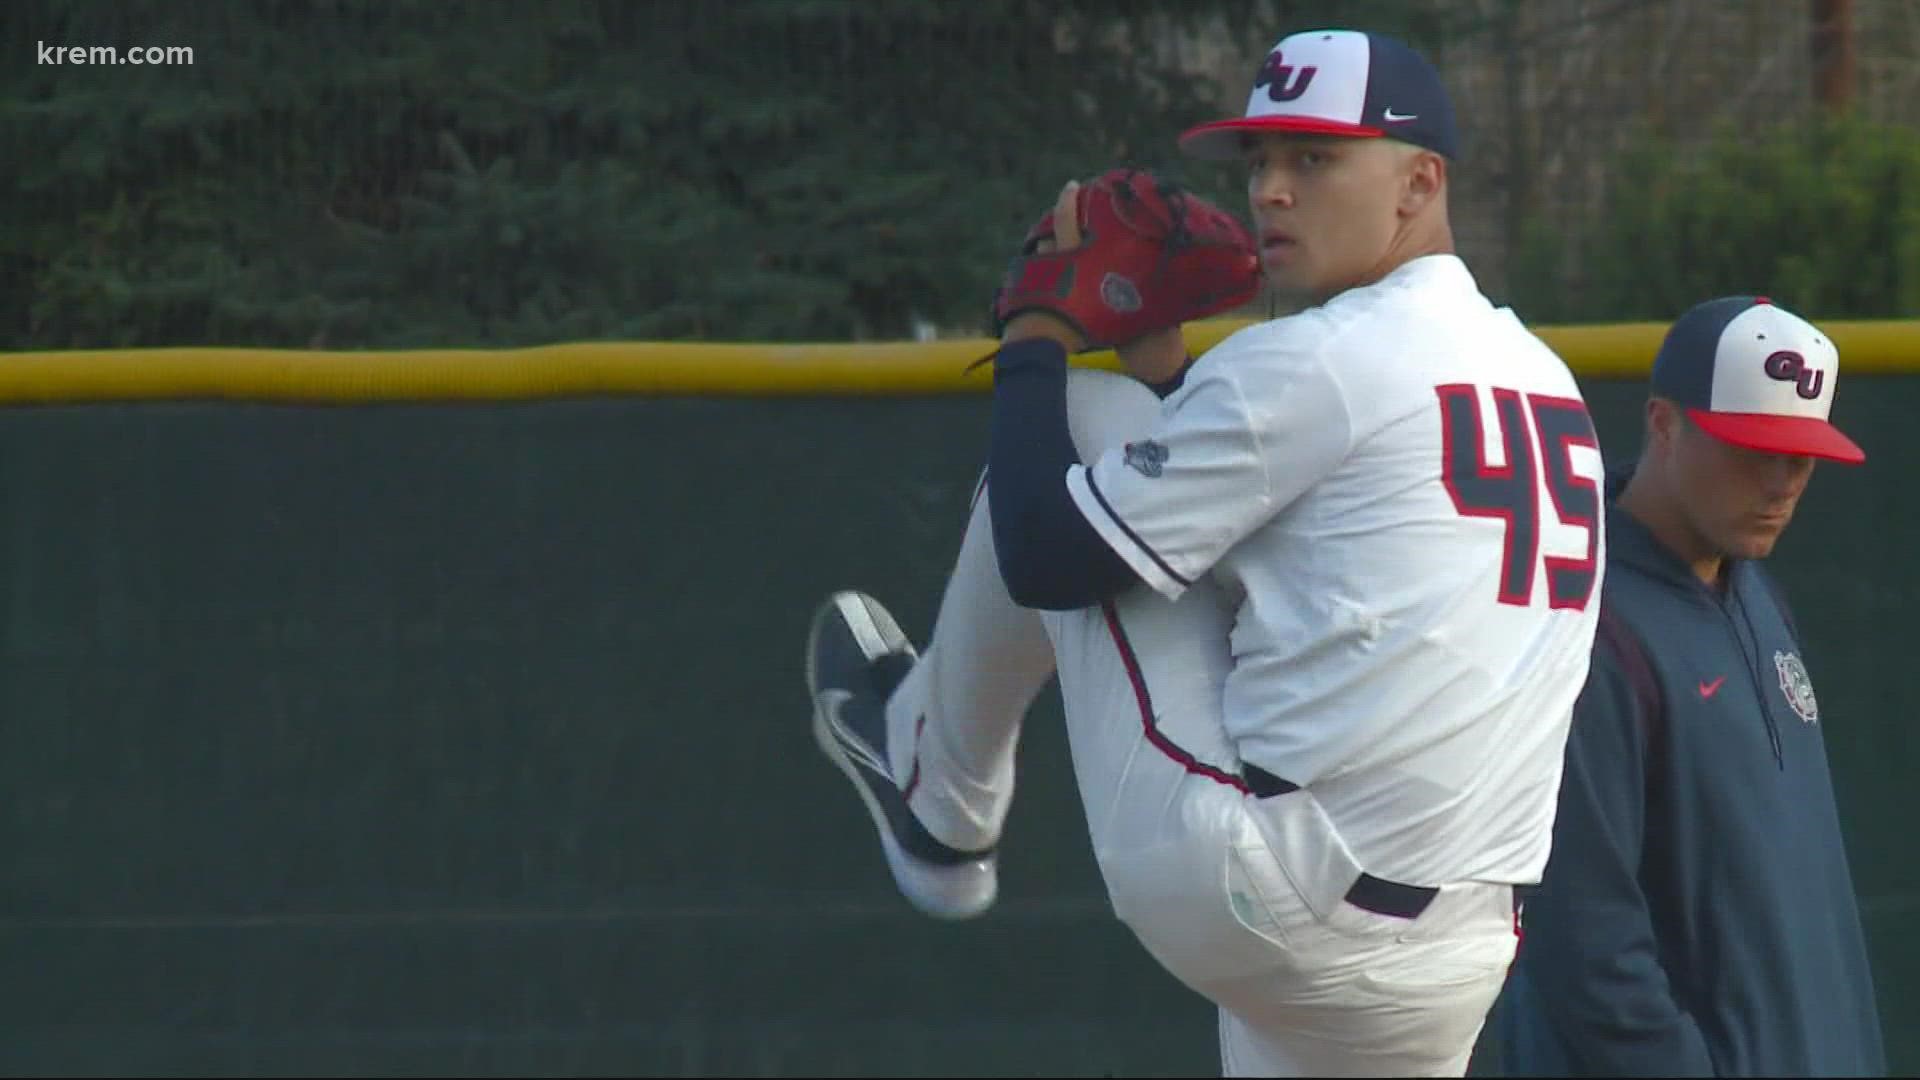 A big reason for Gonzaga's strong start this season has been the pitching staff which is led by sophomore Gabriel Hughes who's emerged as a star.